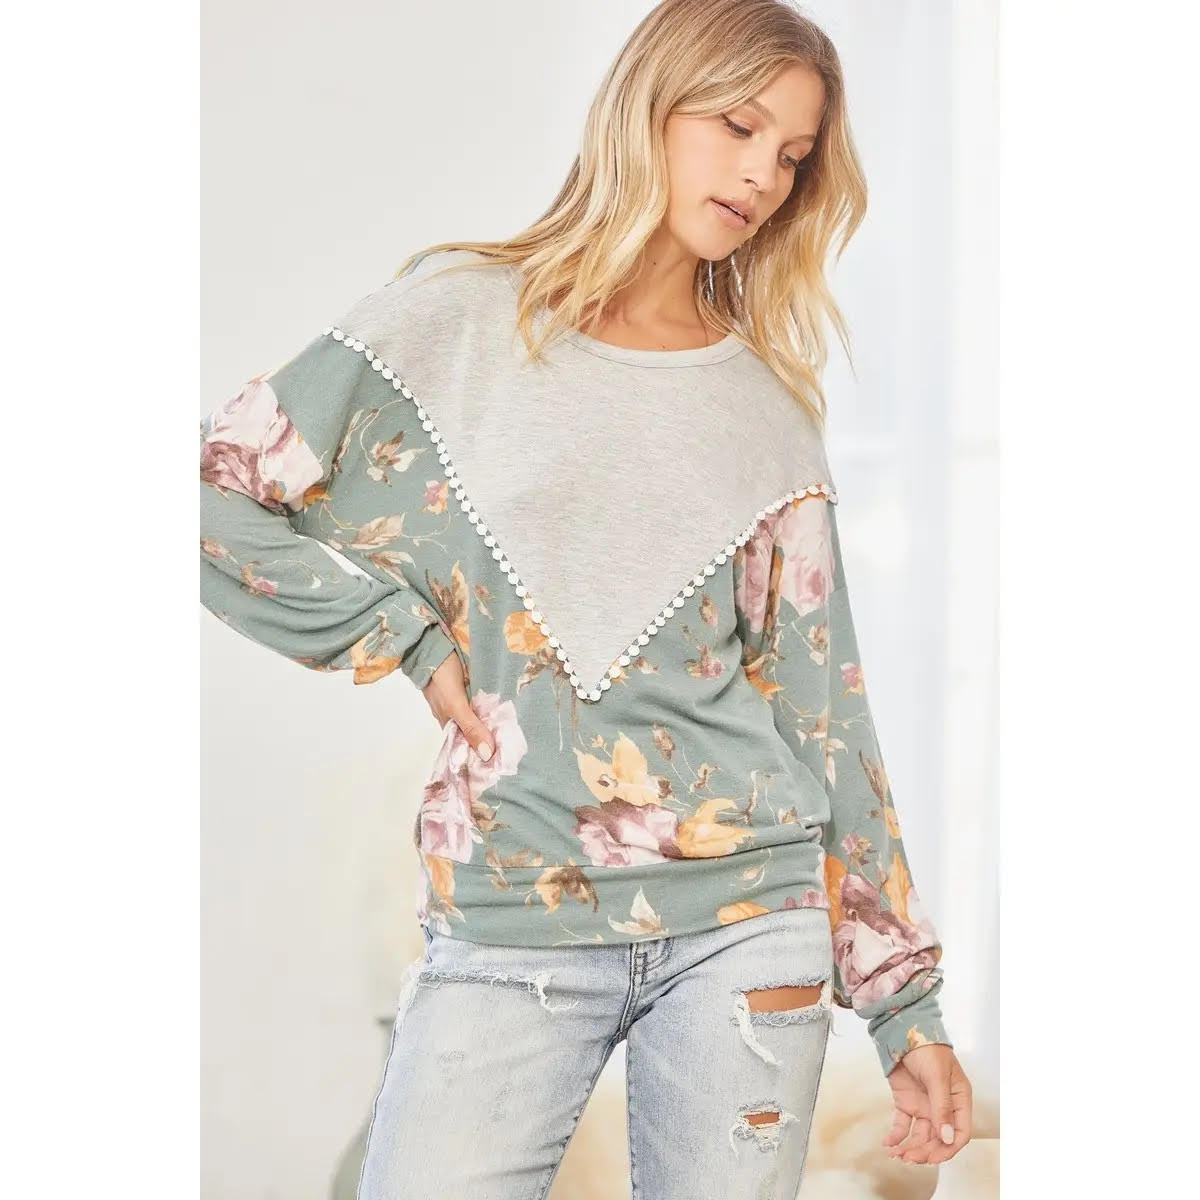 Teal Grey Knit Floral Top - Anchor Fusion Boutique